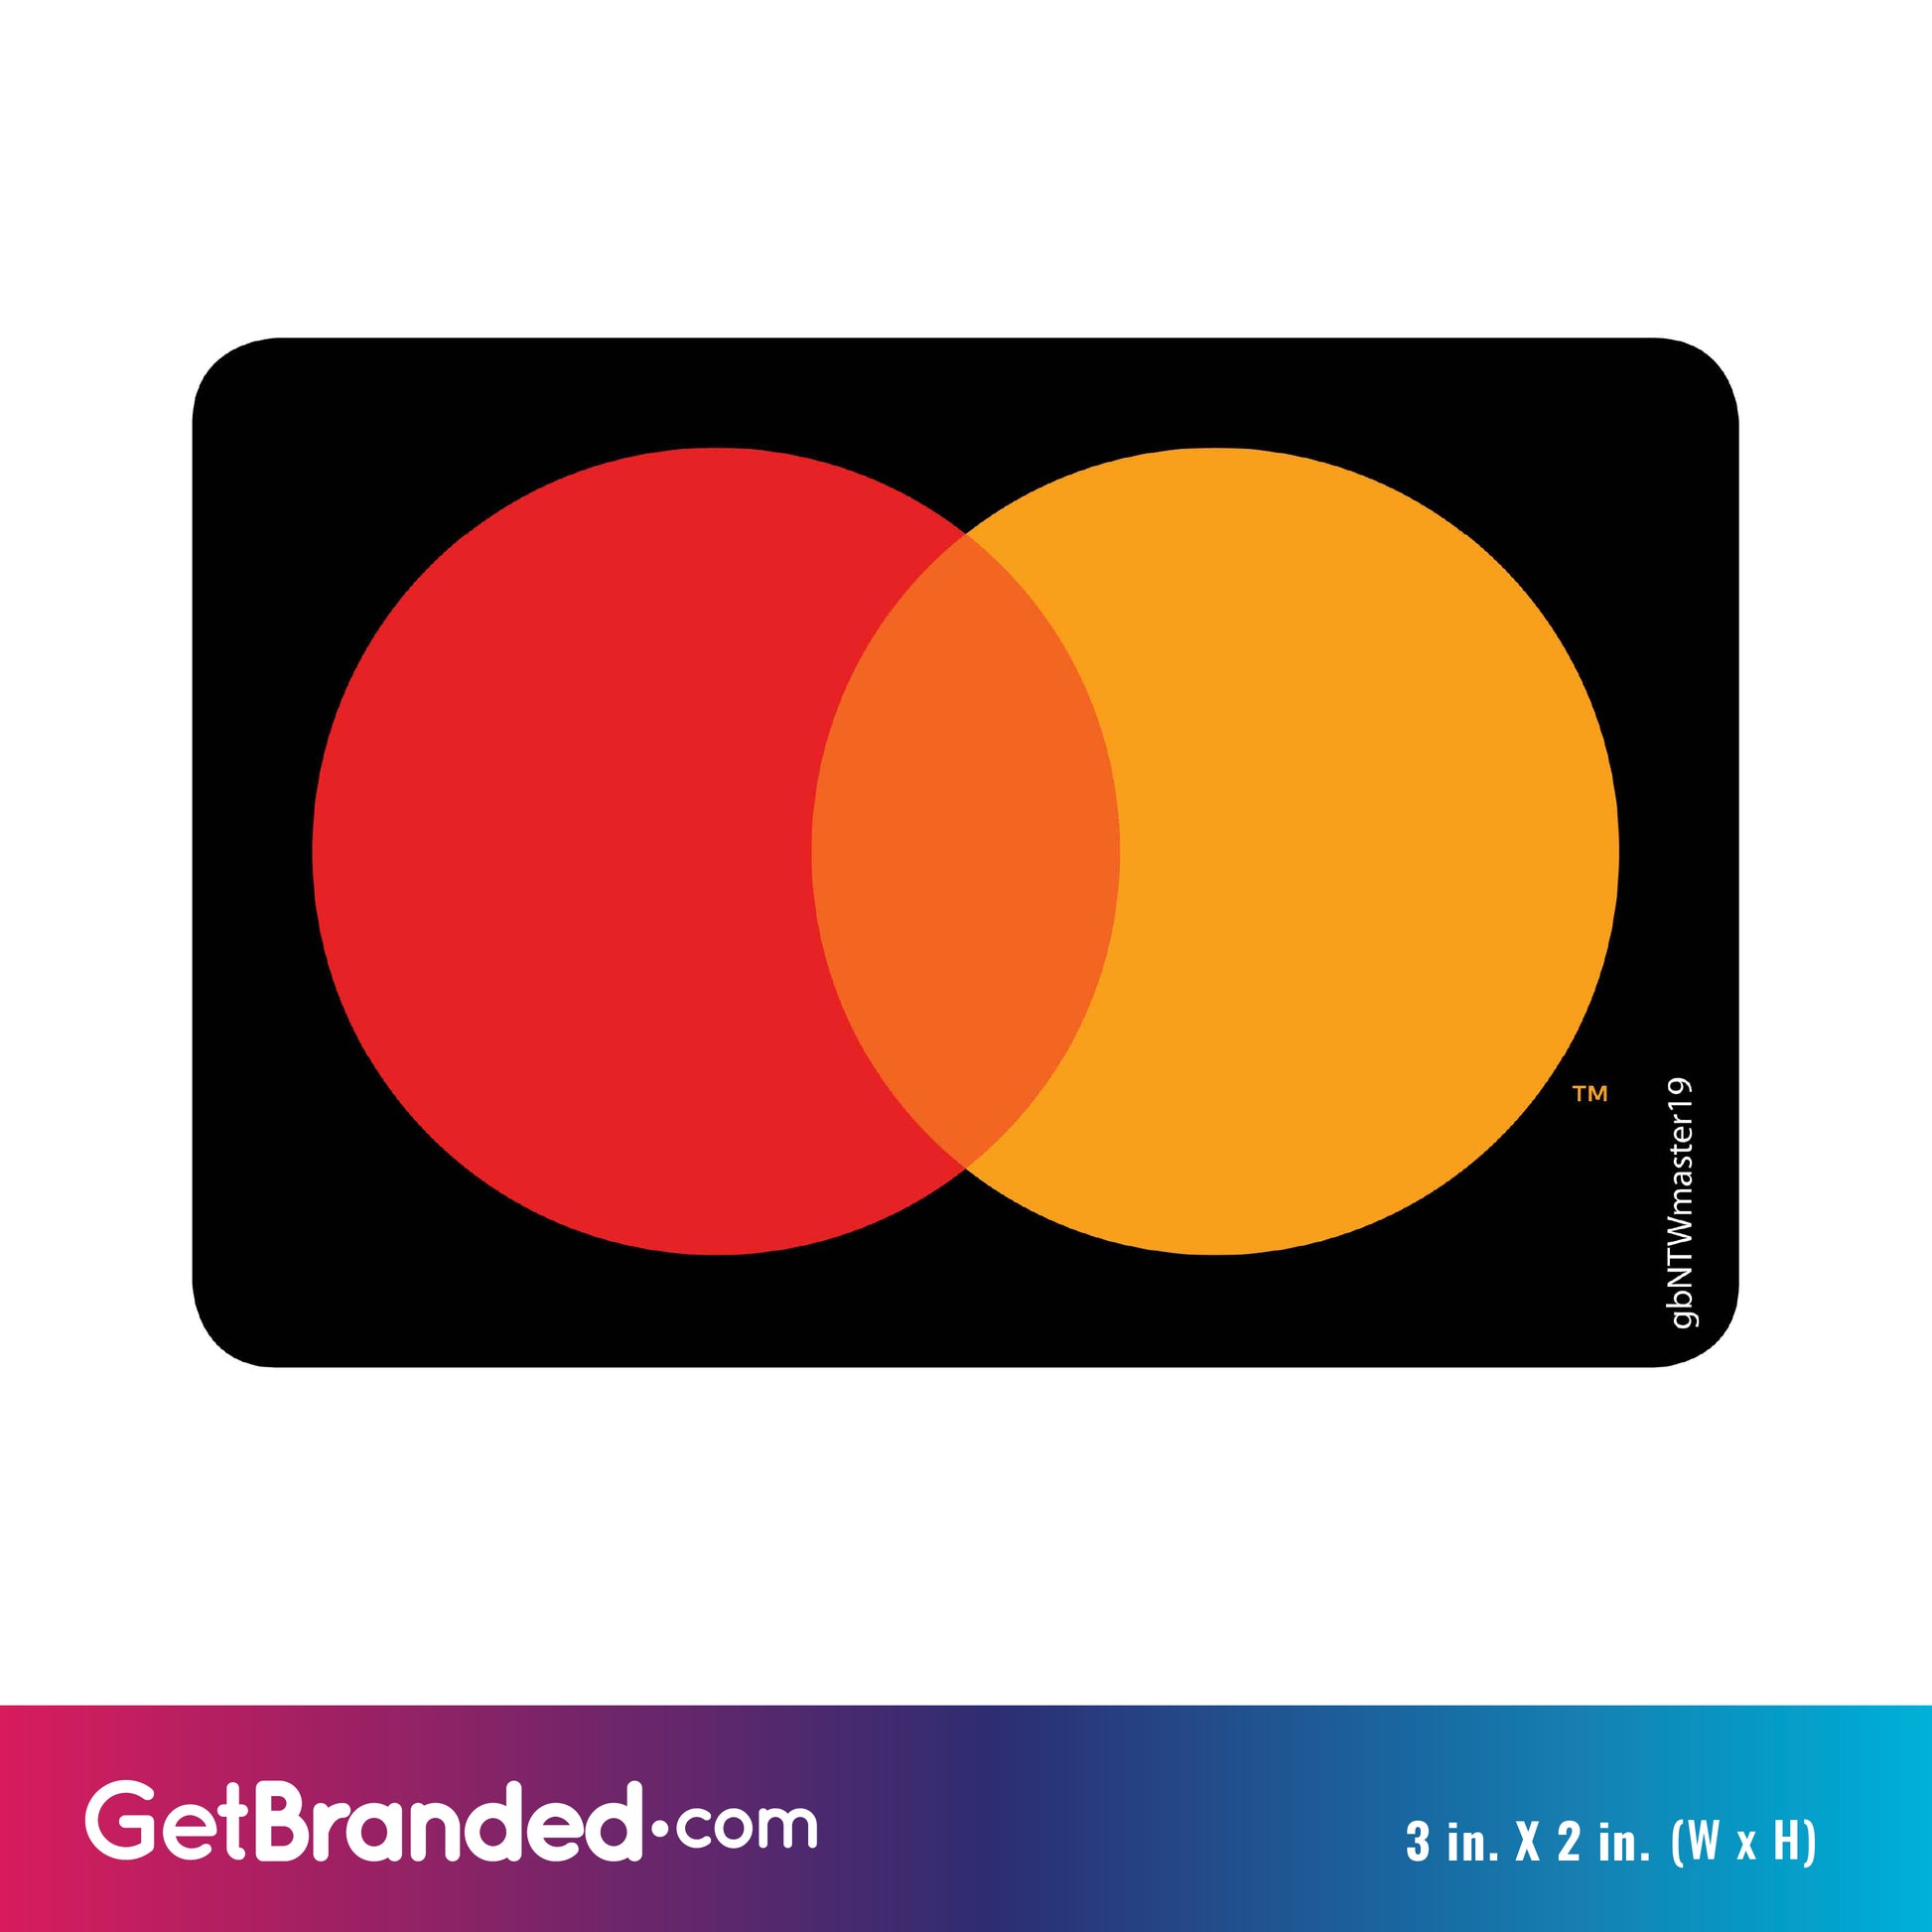 Single Network Decal, MasterCard size guide.